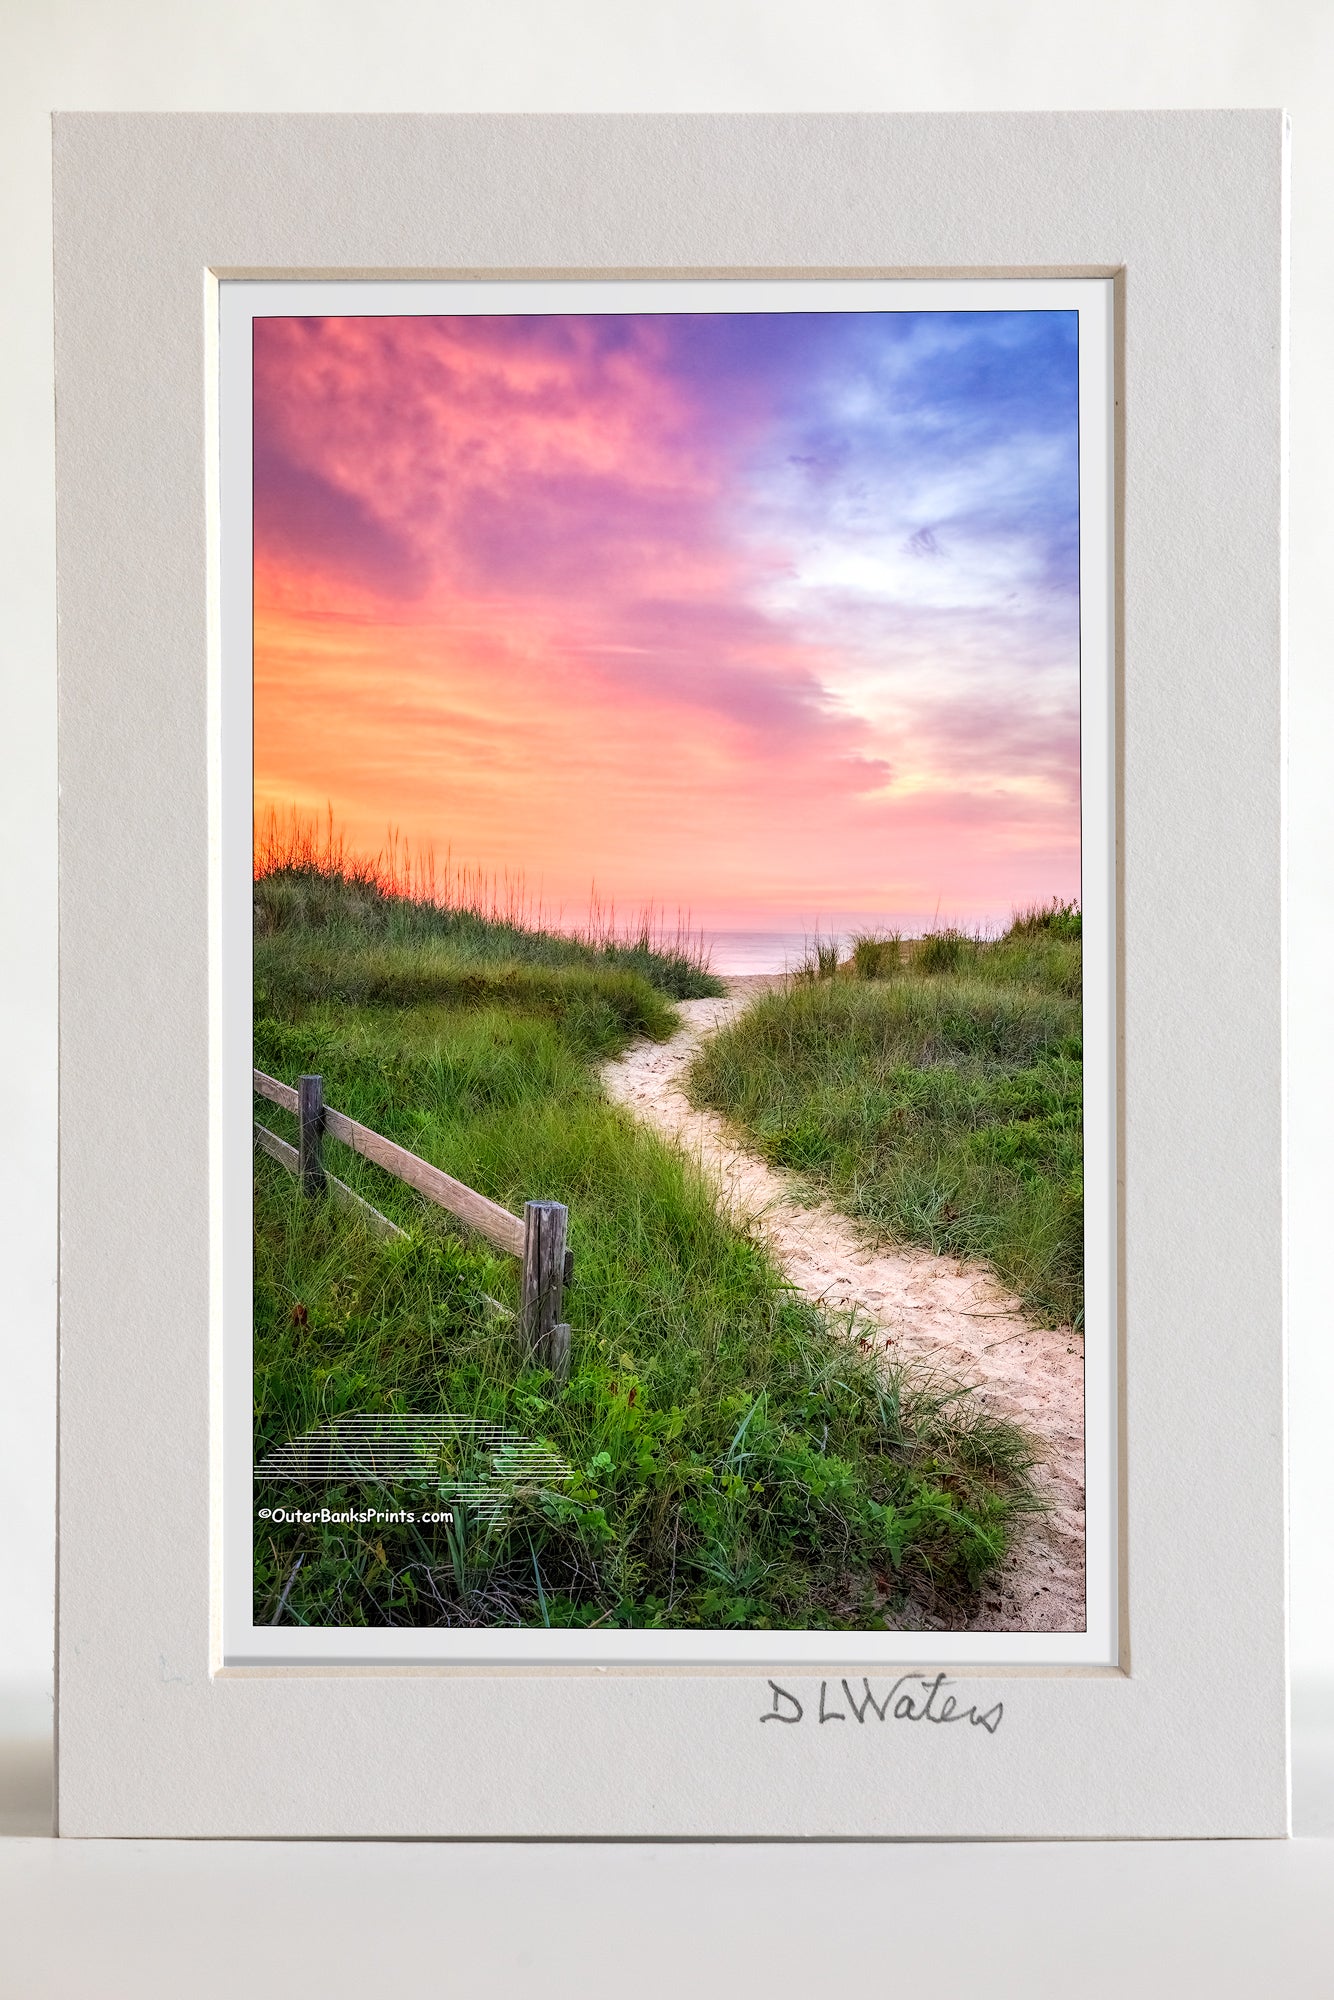 4 x 6 luster print in a 5 x 7 ivory mat of  Kitty Hawk path to the beach at twilight, lit with a flashlight, on the Outer banks.